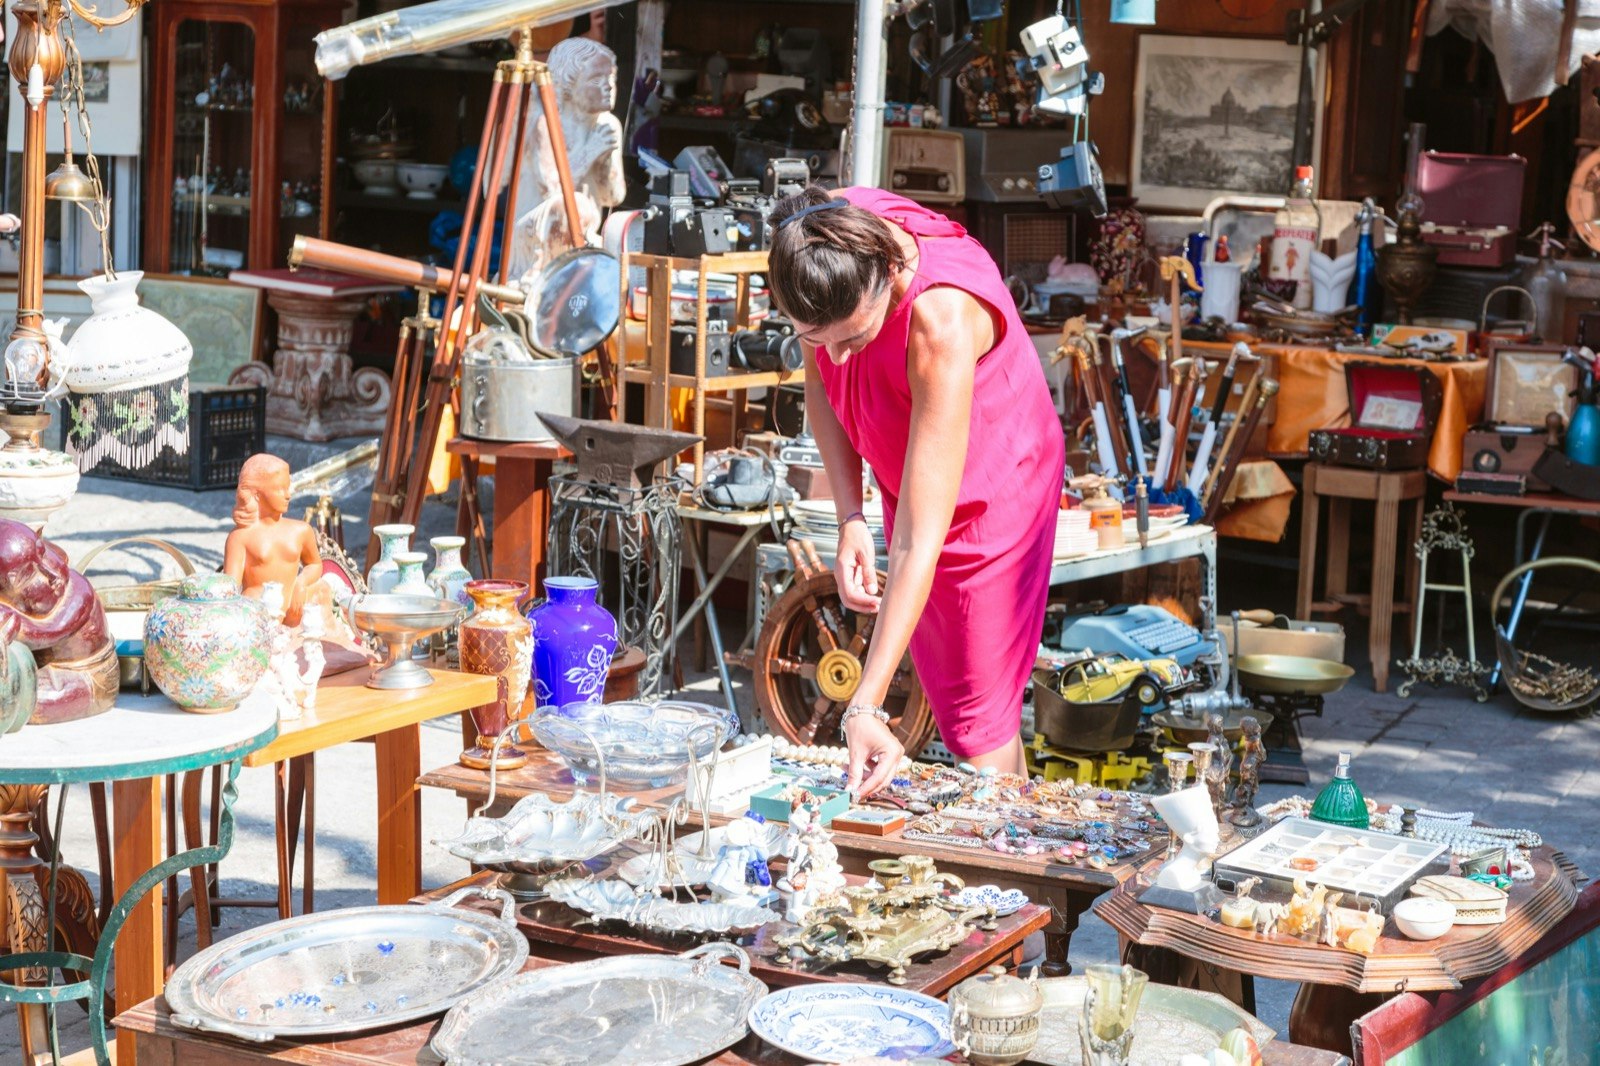 Woman in pink dress shops at a flea market in Athens